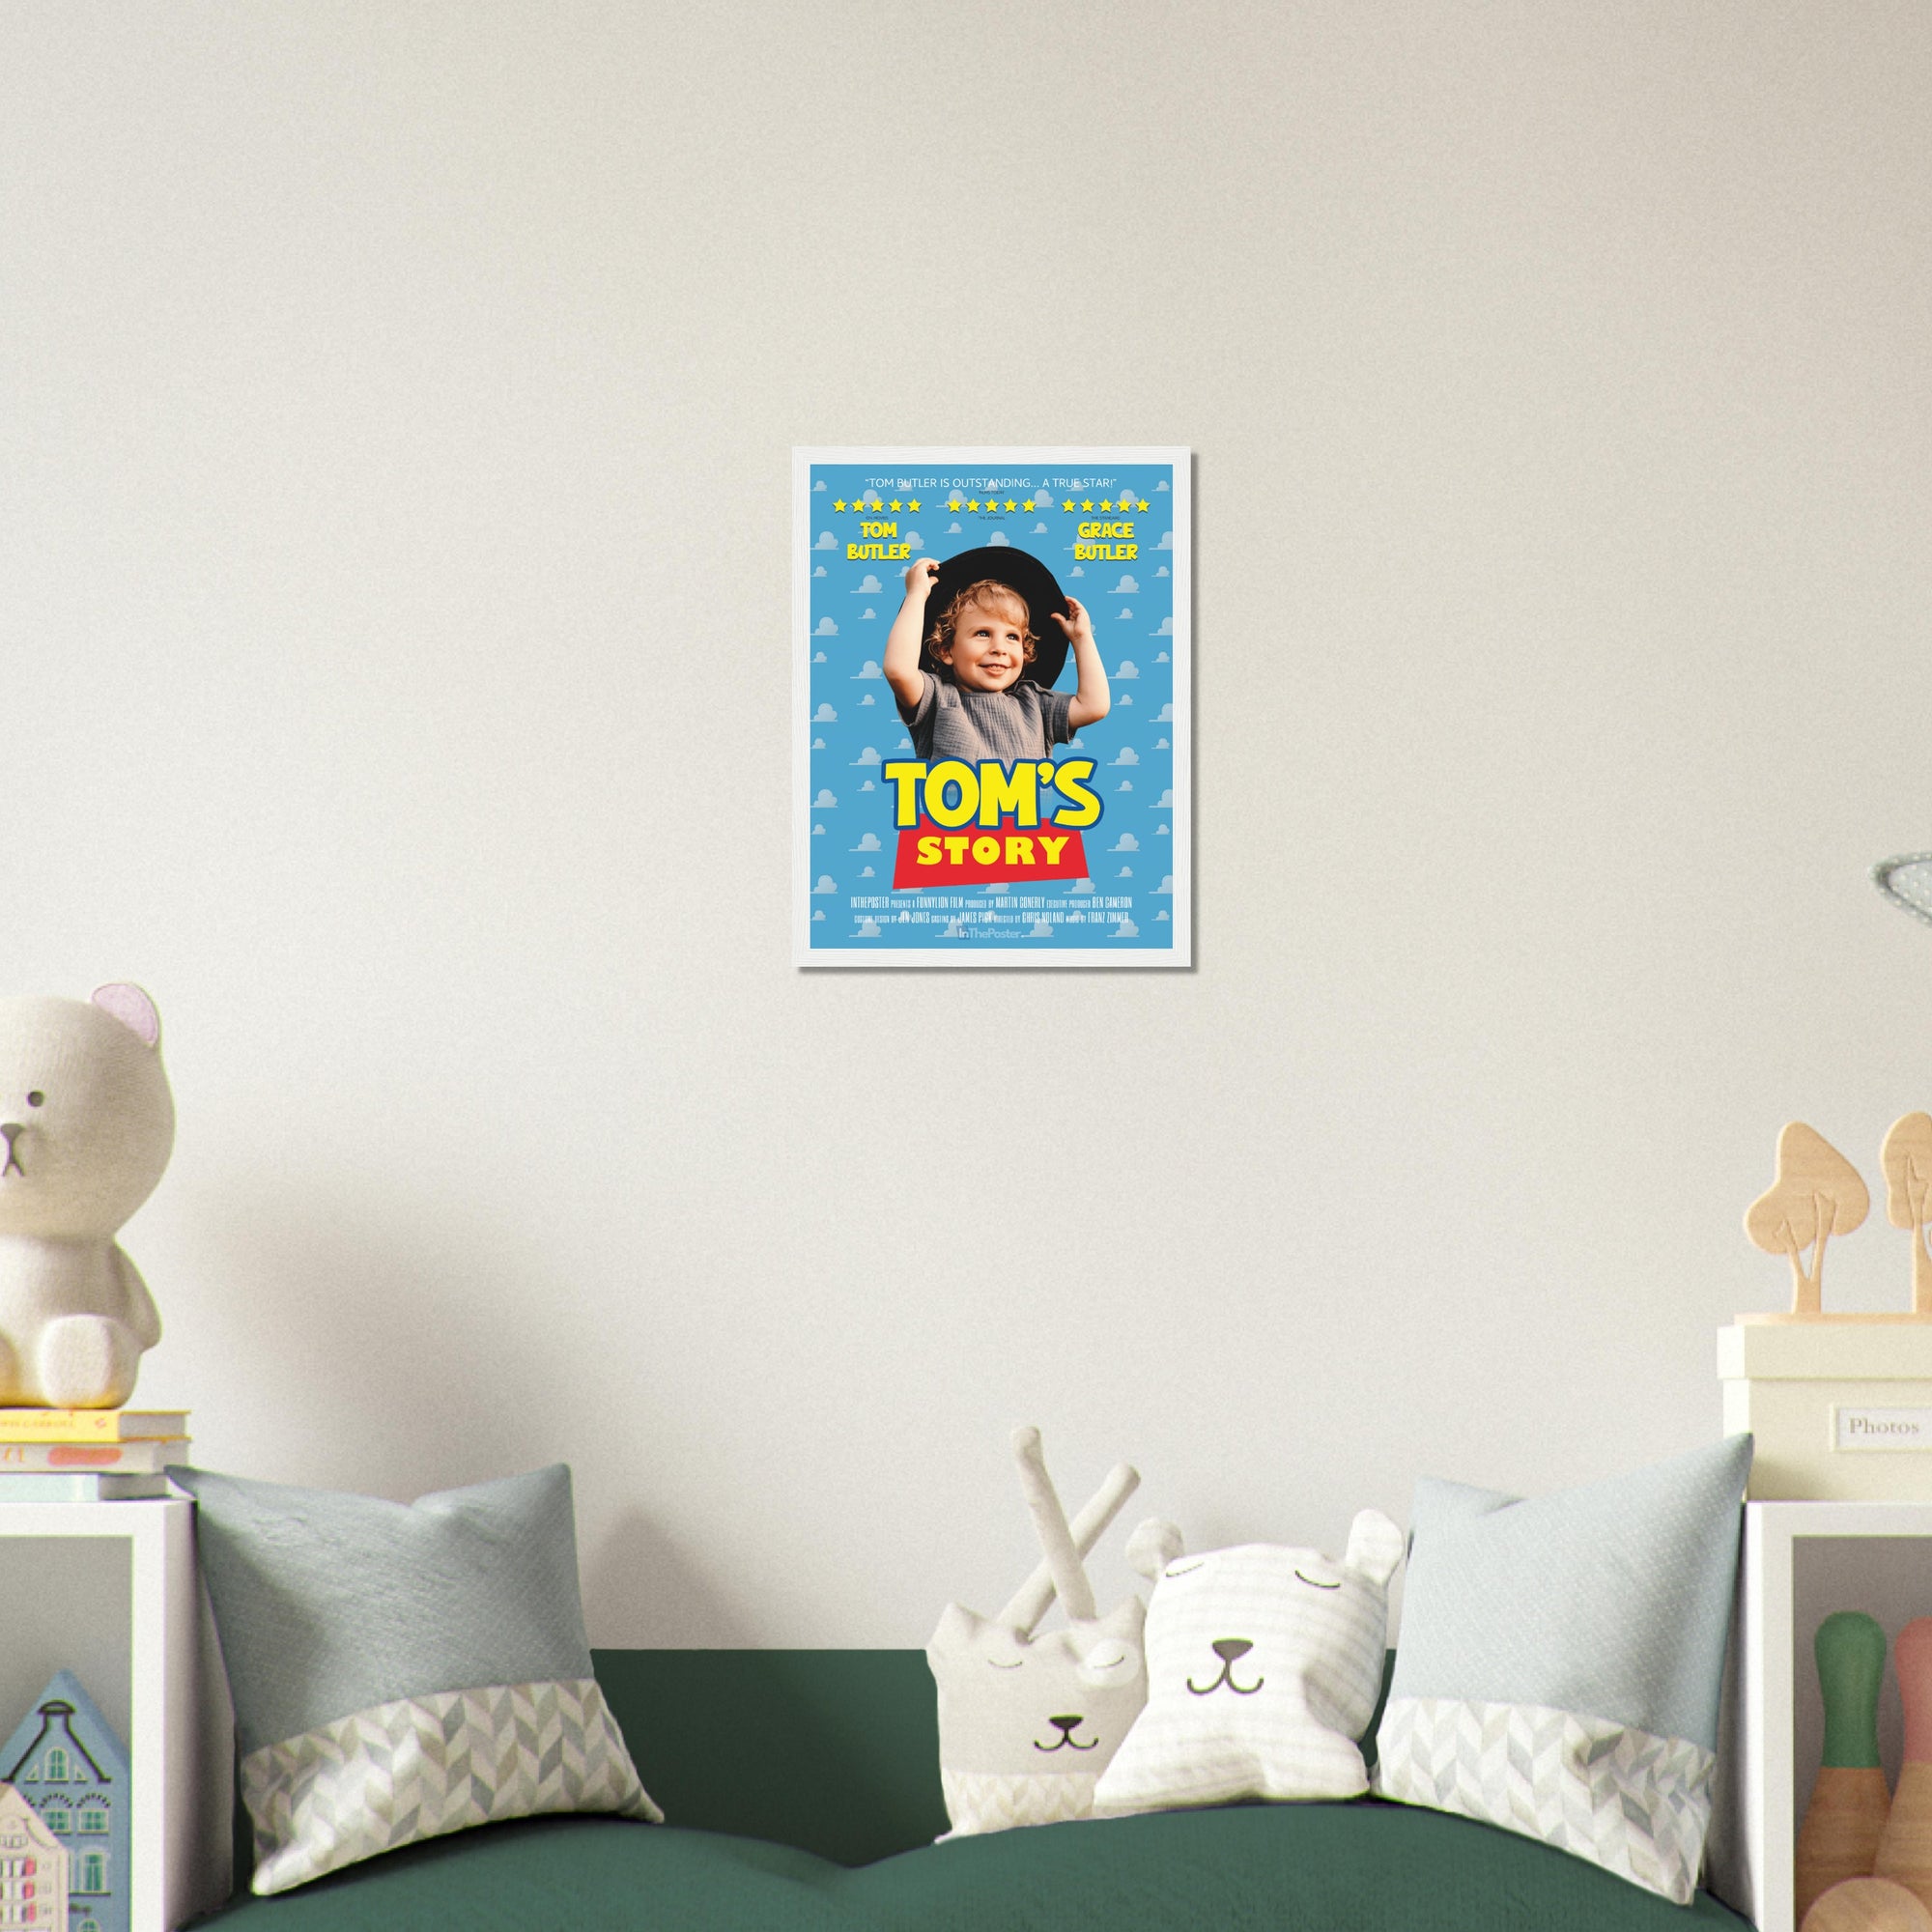 A Toy Story inspired movie poster design in a small white frame, on a grey wall in a kids bedroom